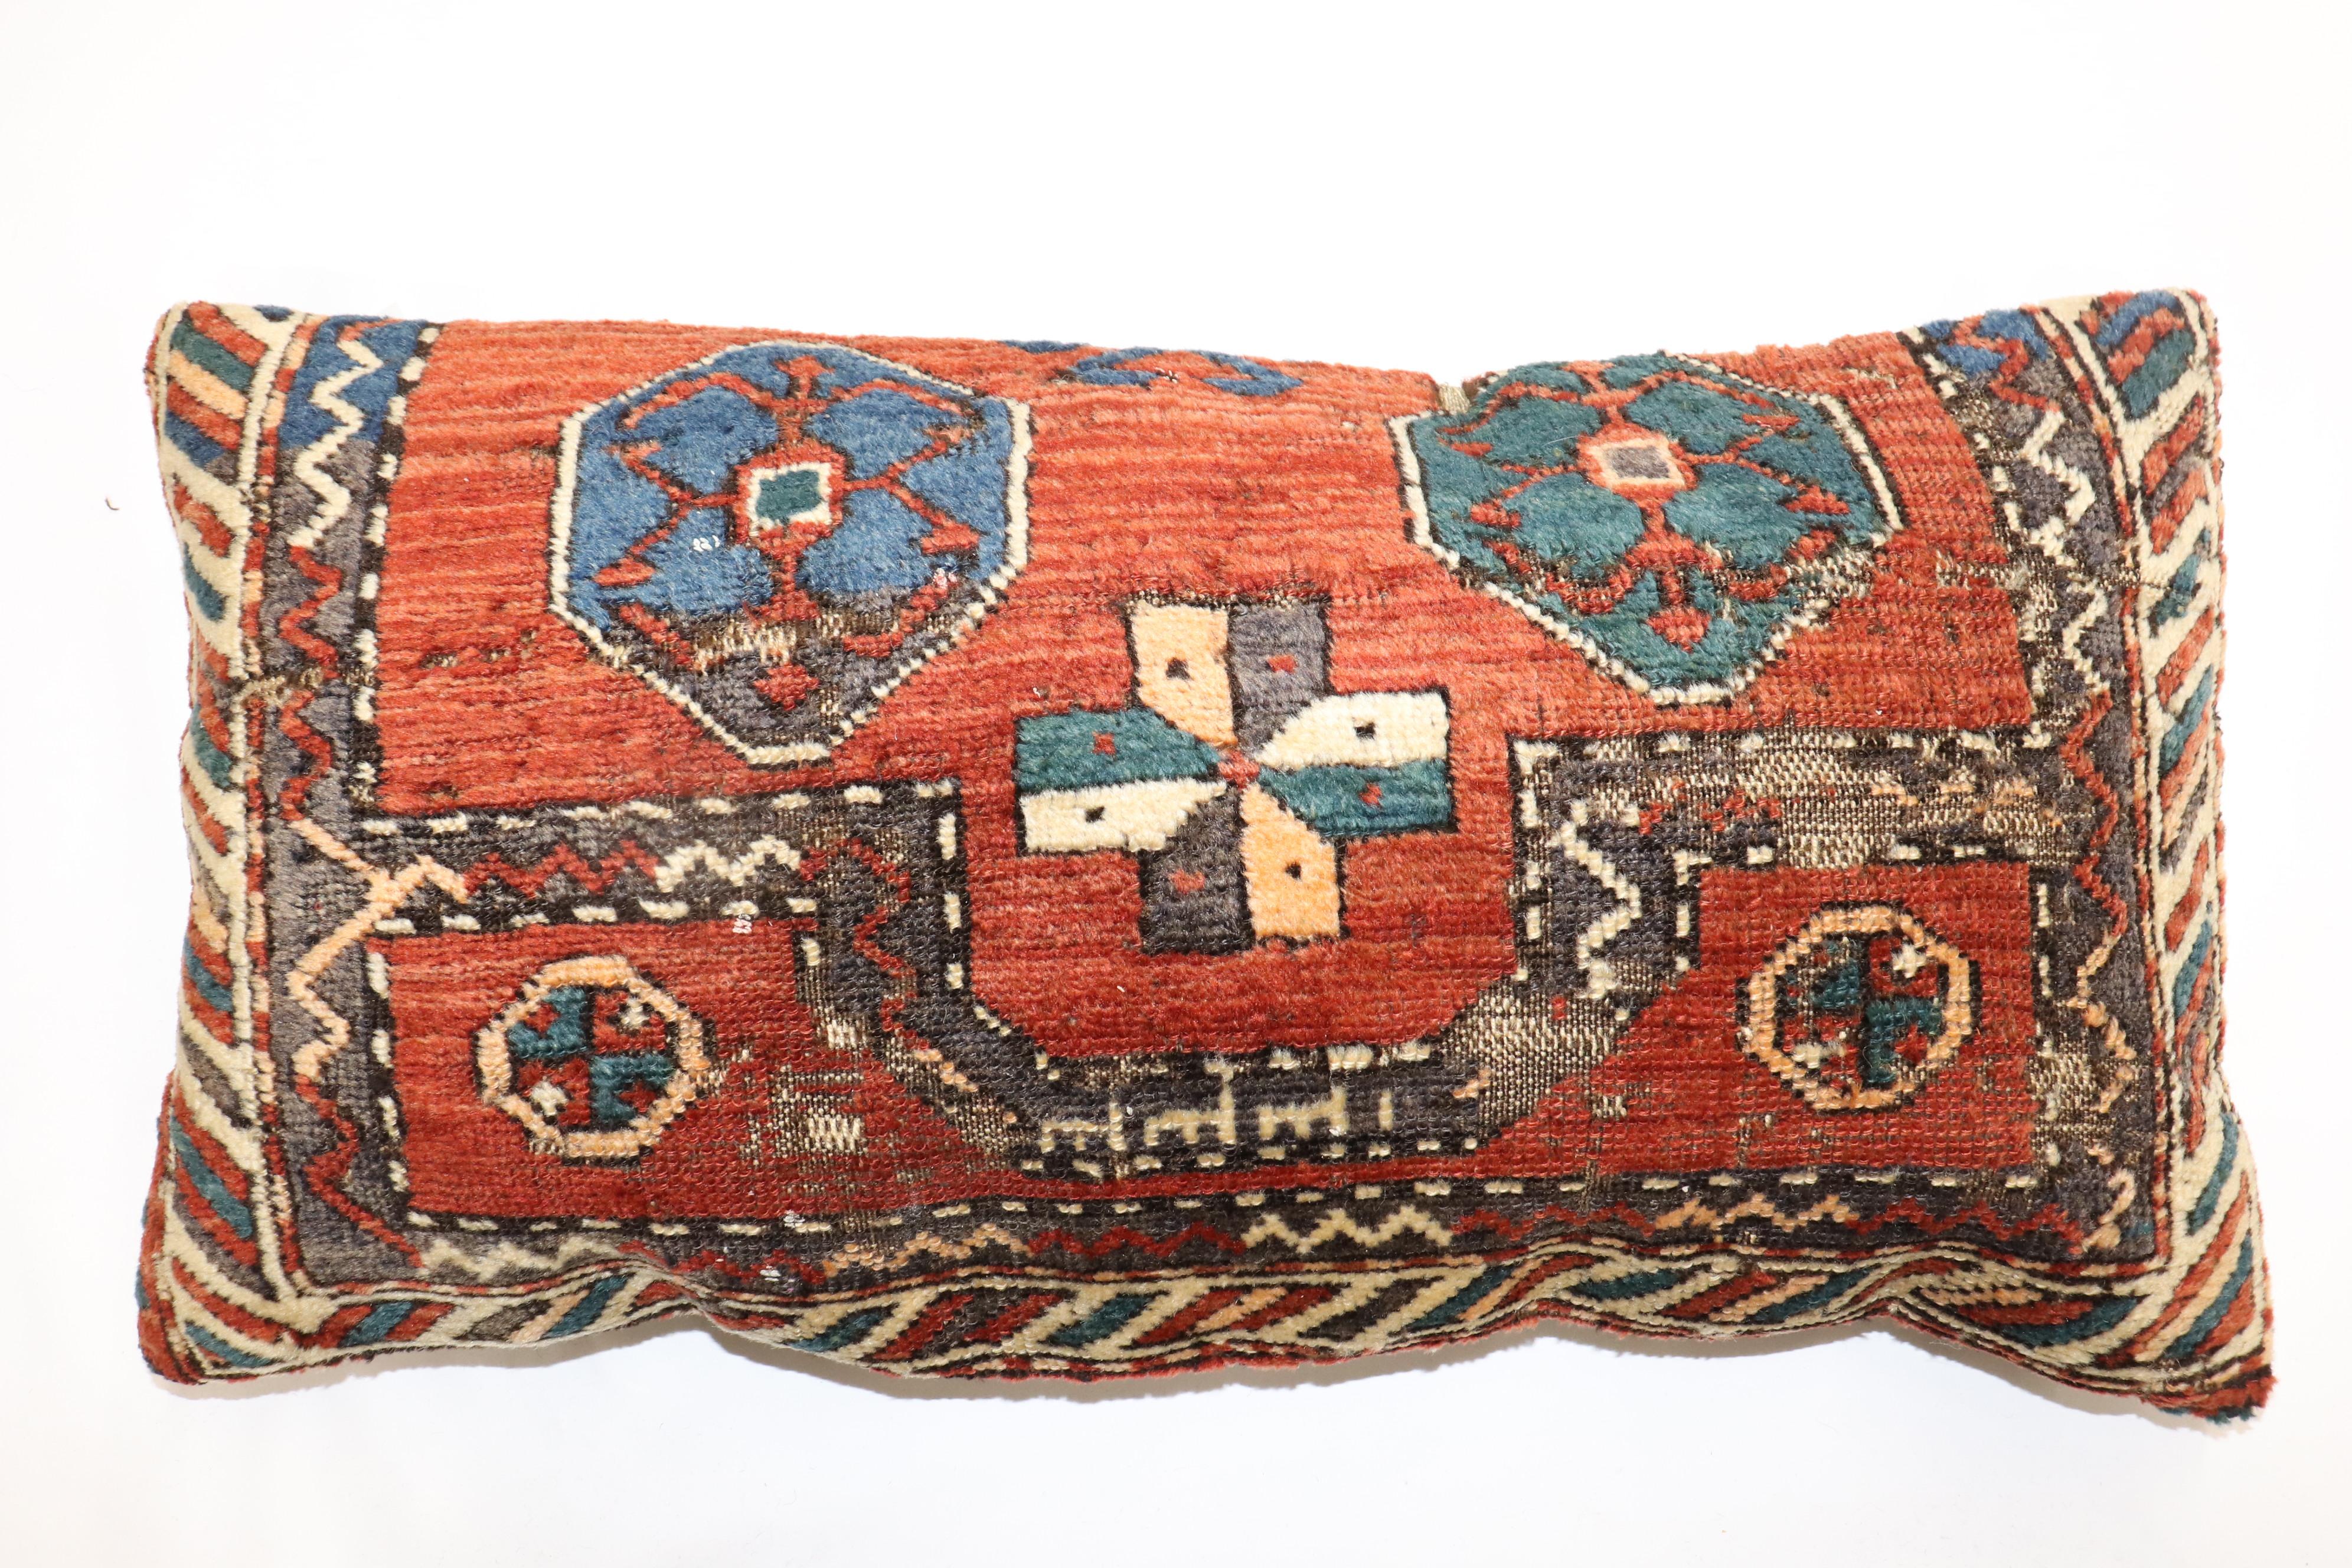 Largepillow made from an early 20th century Antique Persian Kurd Rug rug. Zipper closure and poly-fill provided.

Measures: 16'' x 30''.